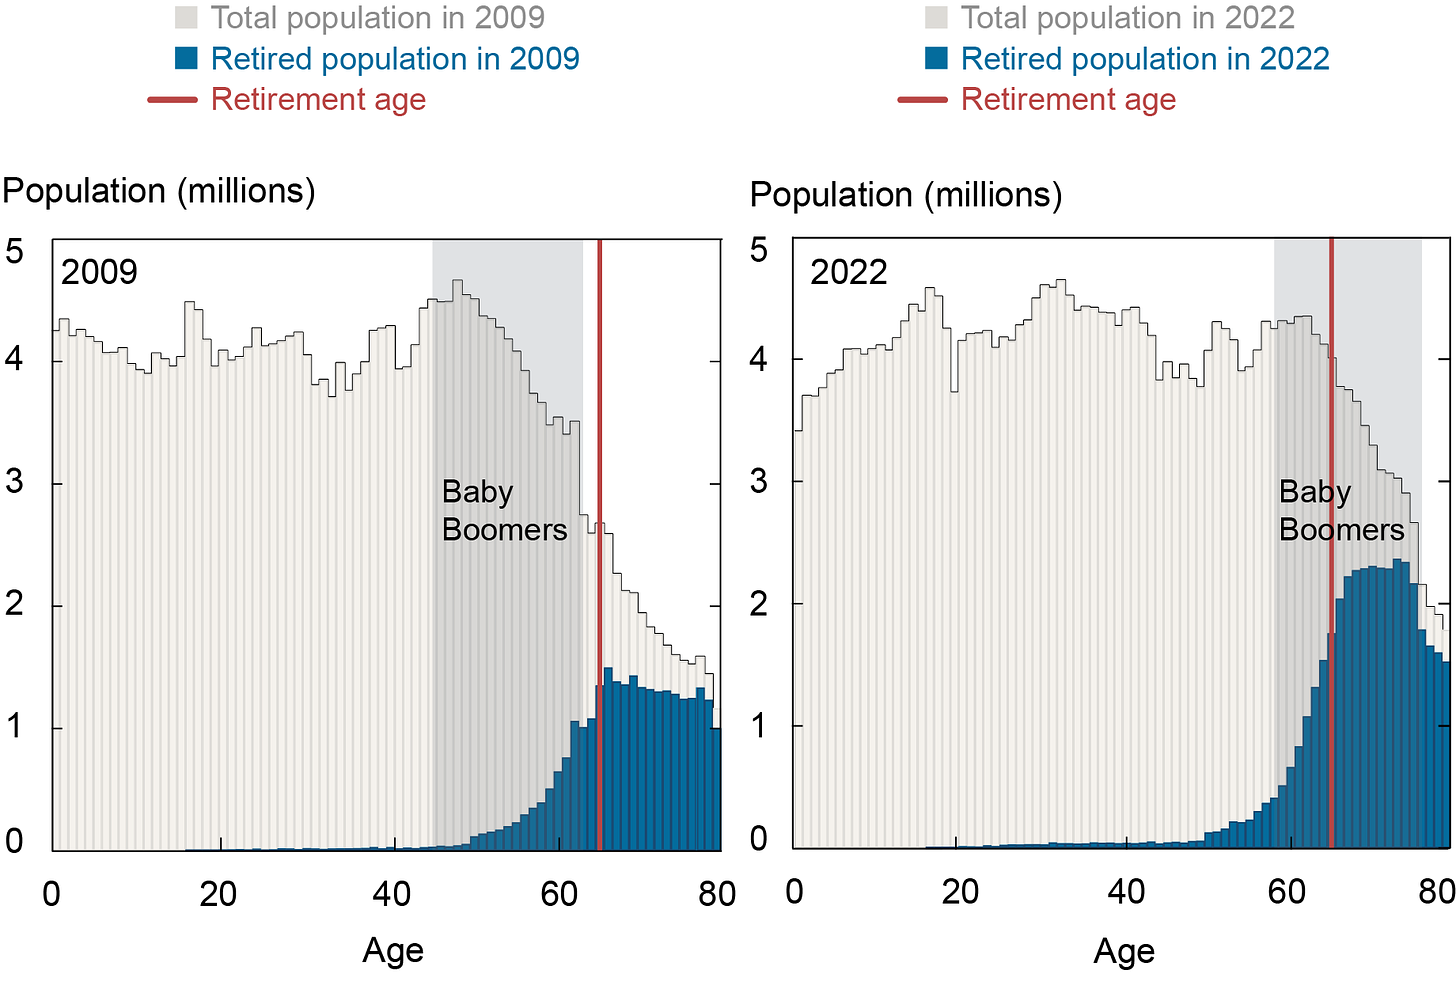 Two-panel Liberty Street Economics chart showing retirements have increased dramatically as the baby-boomer cohort has reached the retirement threshold. The left panel shows the distribution of the U.S. population in 2009, while the right panel shows the same distribution in 2022.